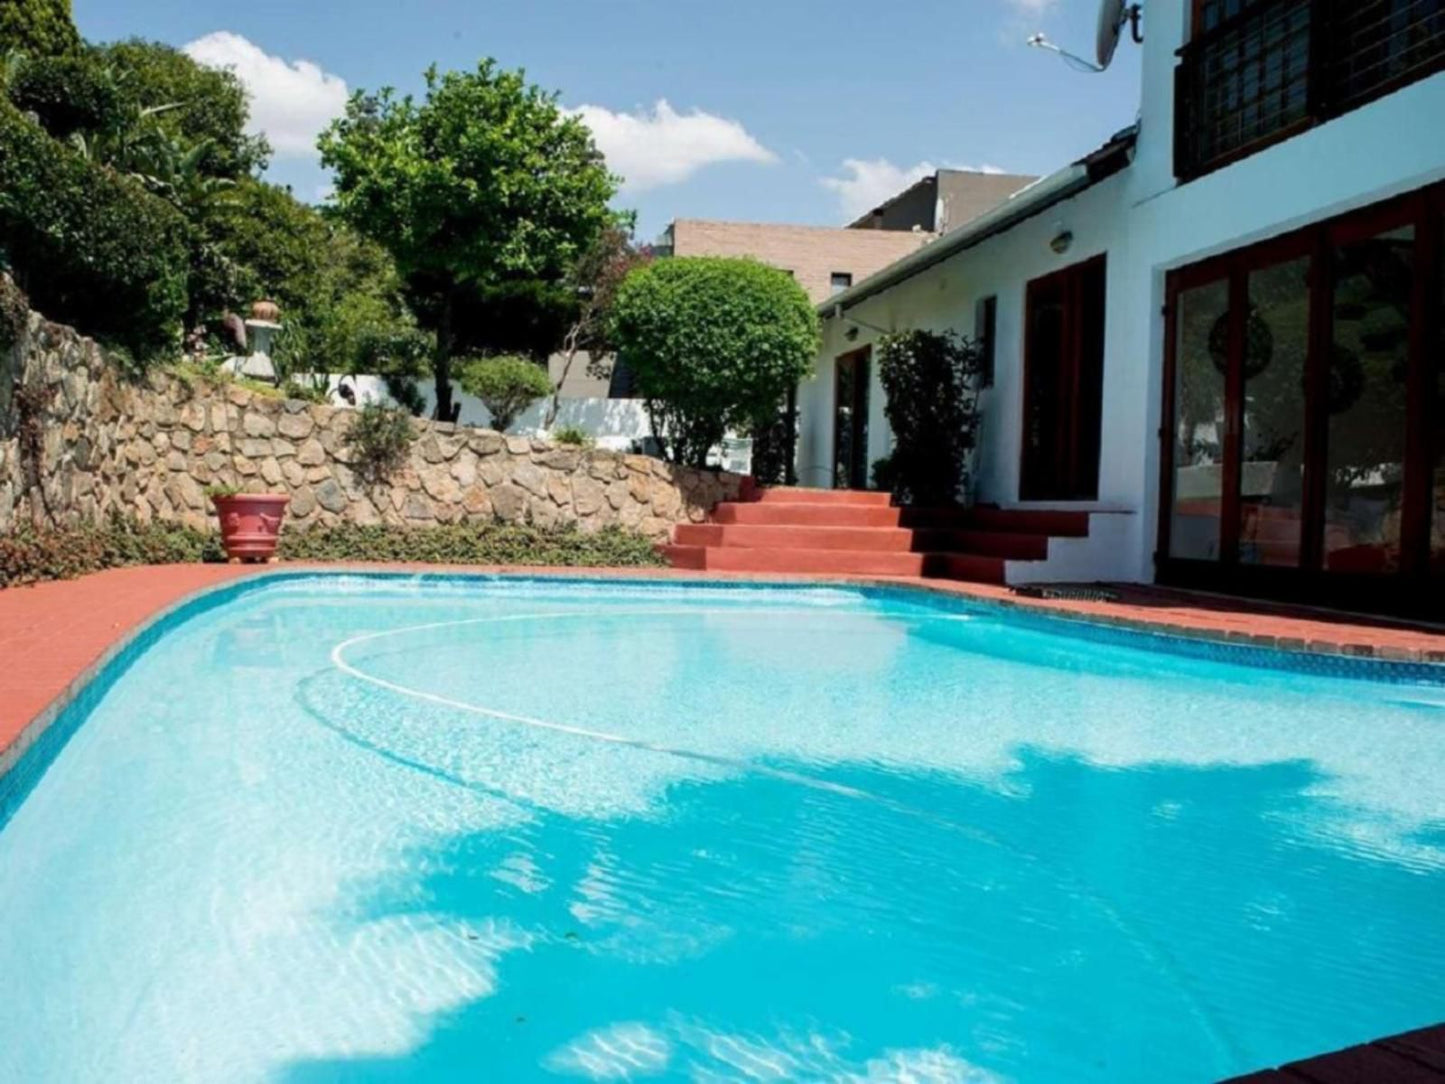 Mizizi House Of Sandton Bed And Breakfast Parkmore Johannesburg Gauteng South Africa House, Building, Architecture, Garden, Nature, Plant, Swimming Pool